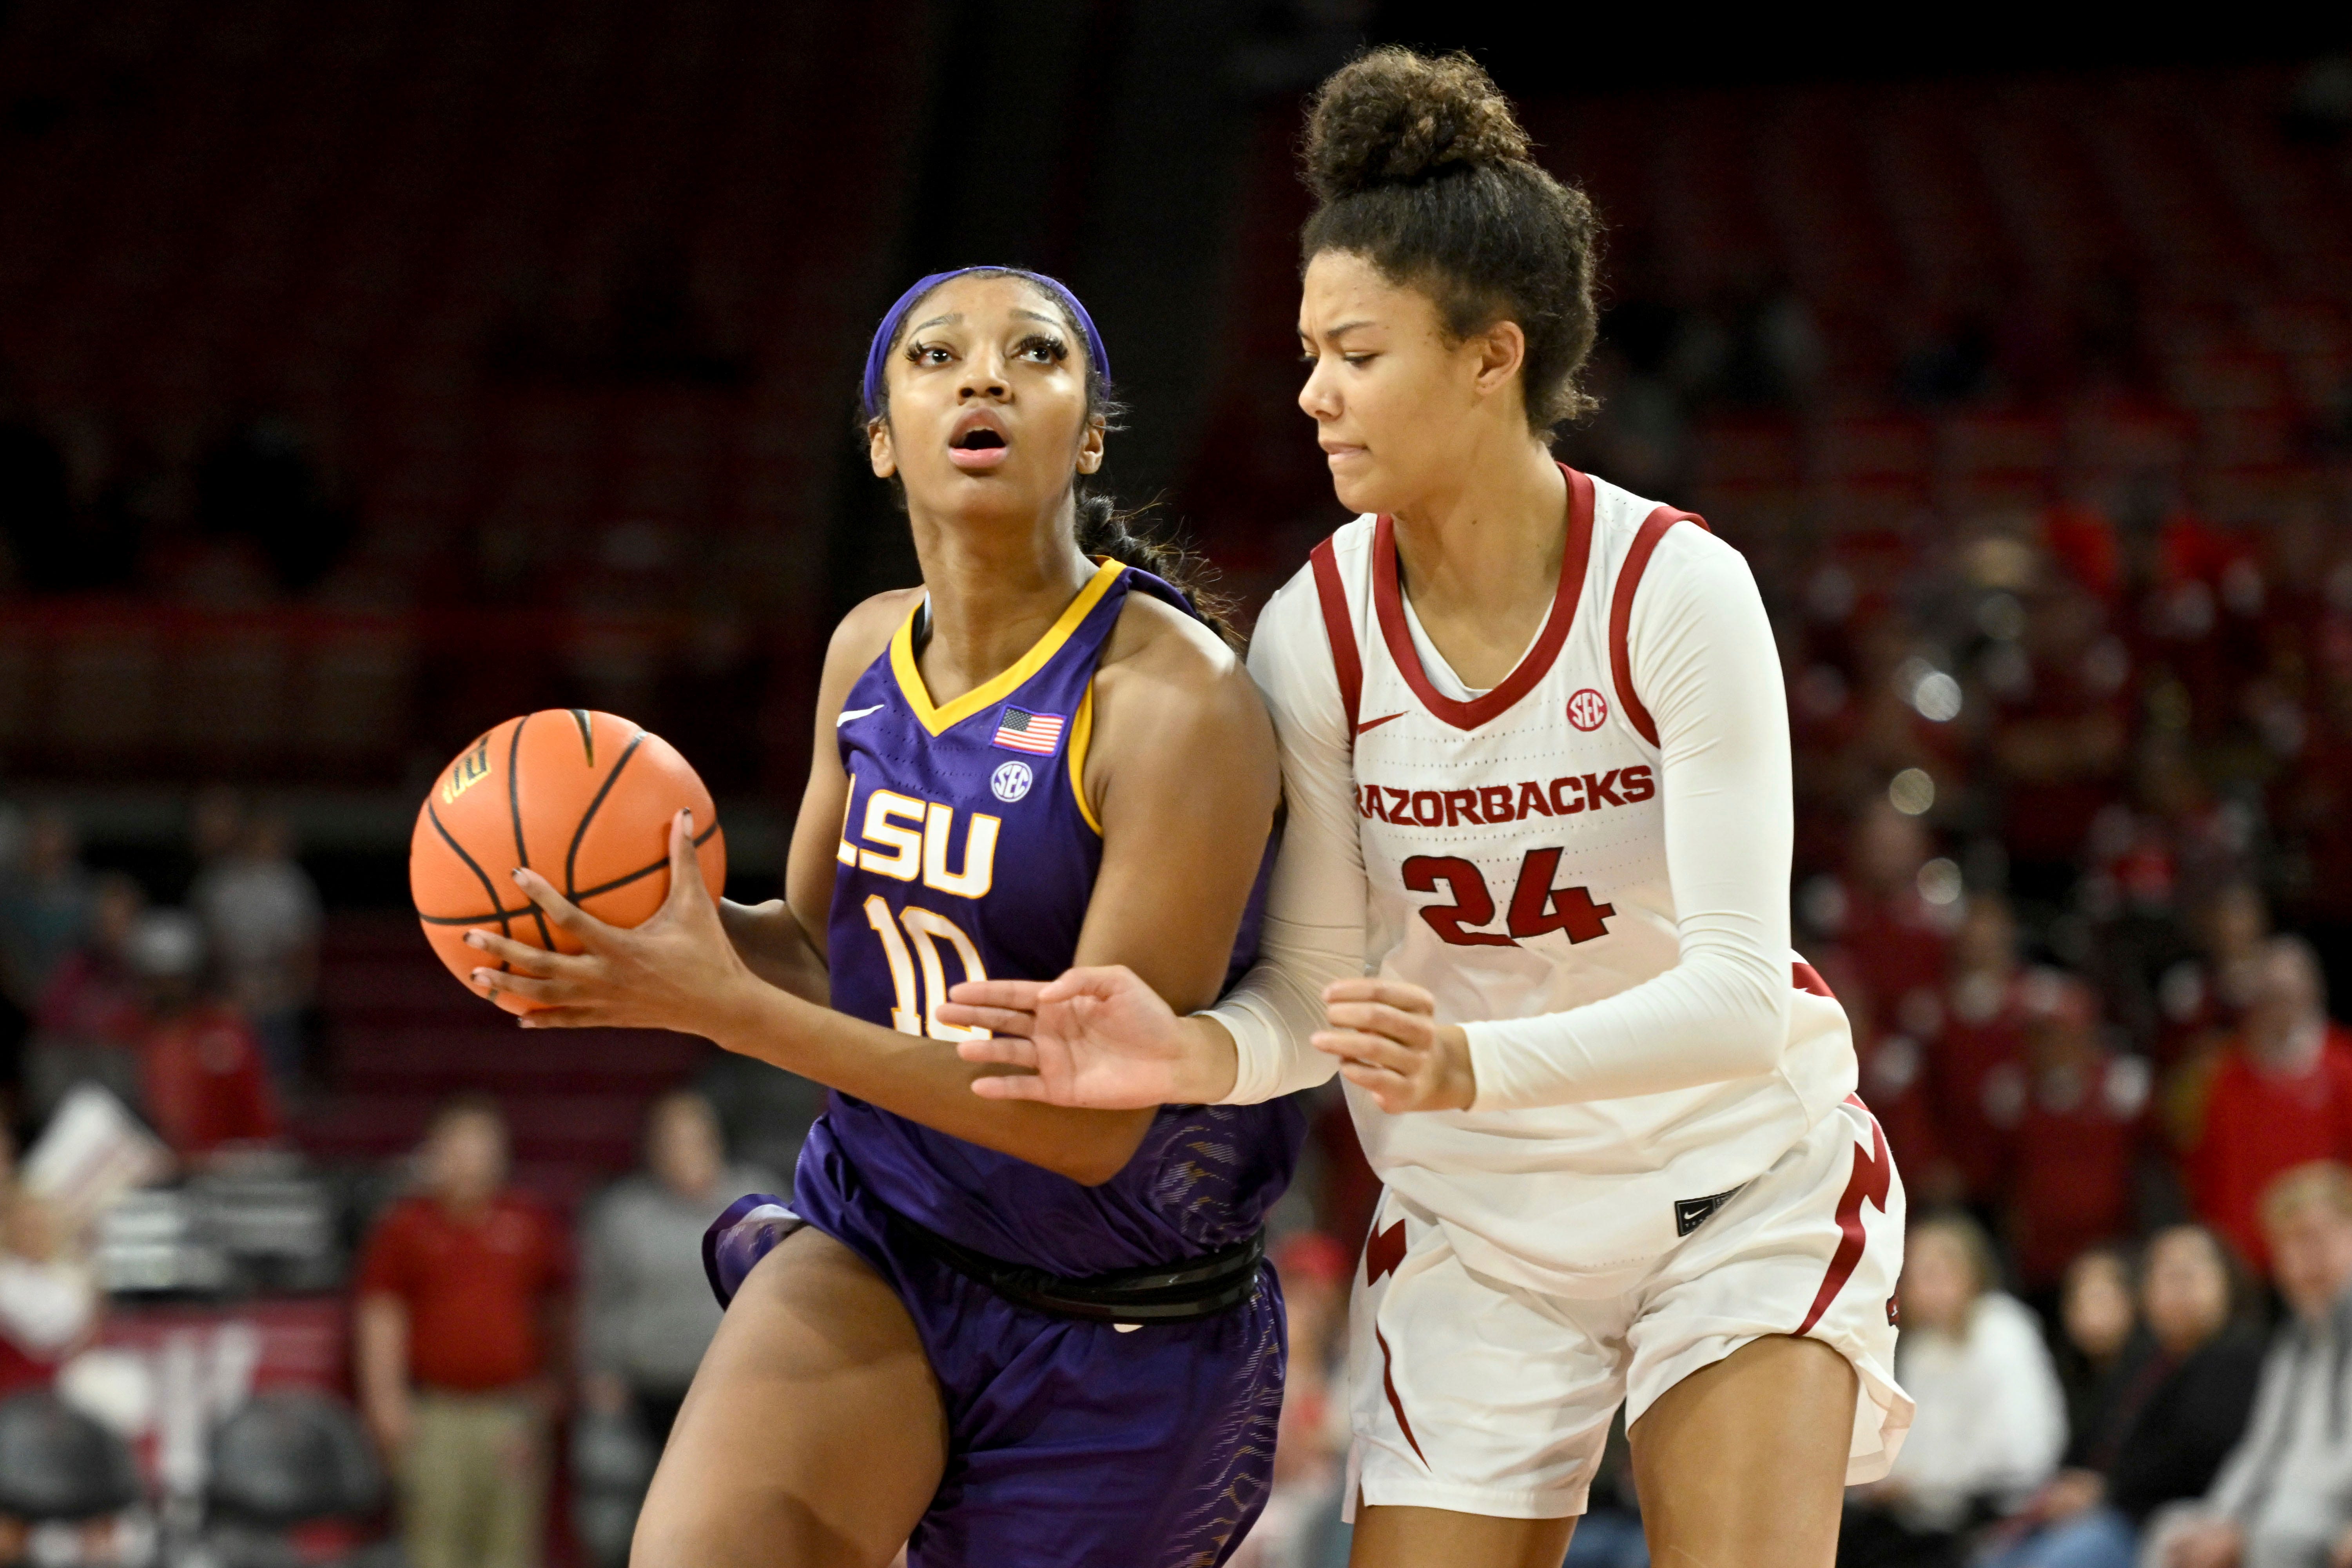 LSU forward Angel Reese (10) tries to drive past Arkansas guard Jersey Wolfenbarger (24) during an NCAA basketball game on Thursday, Dec. 29, 2022, in Fayetteville, Ark. (AP Photo/Michael Woods)